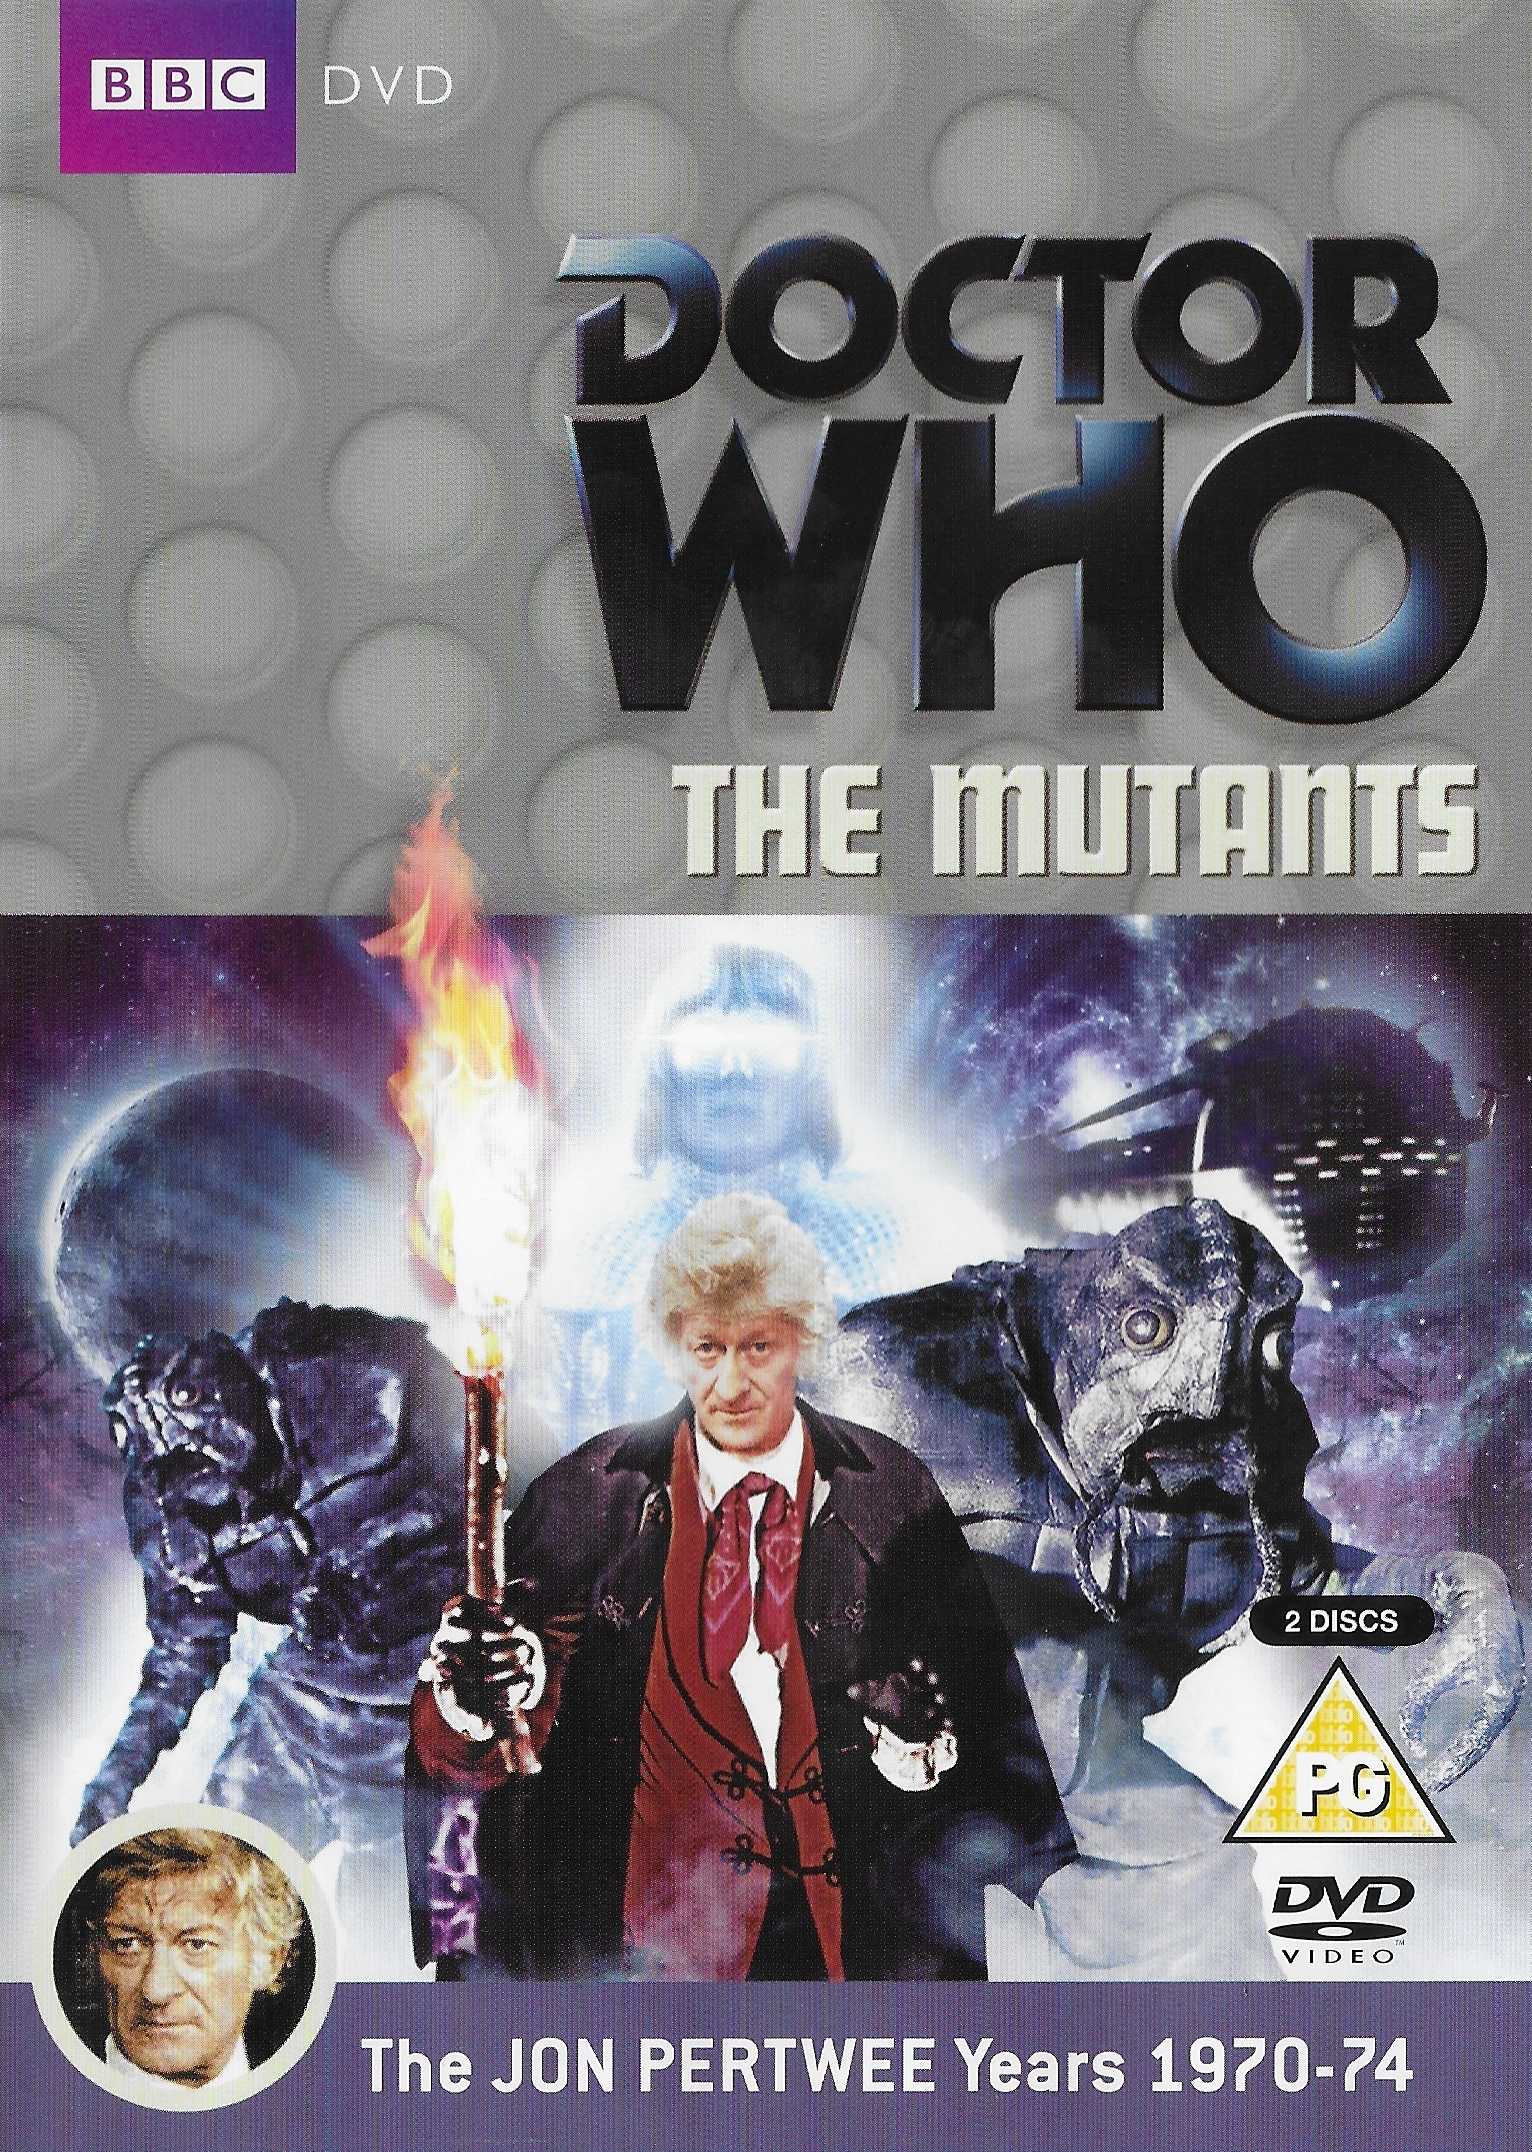 Picture of BBCDVD 3042 Doctor Who - The mutants by artist Bob Baker / Dave Martin from the BBC records and Tapes library